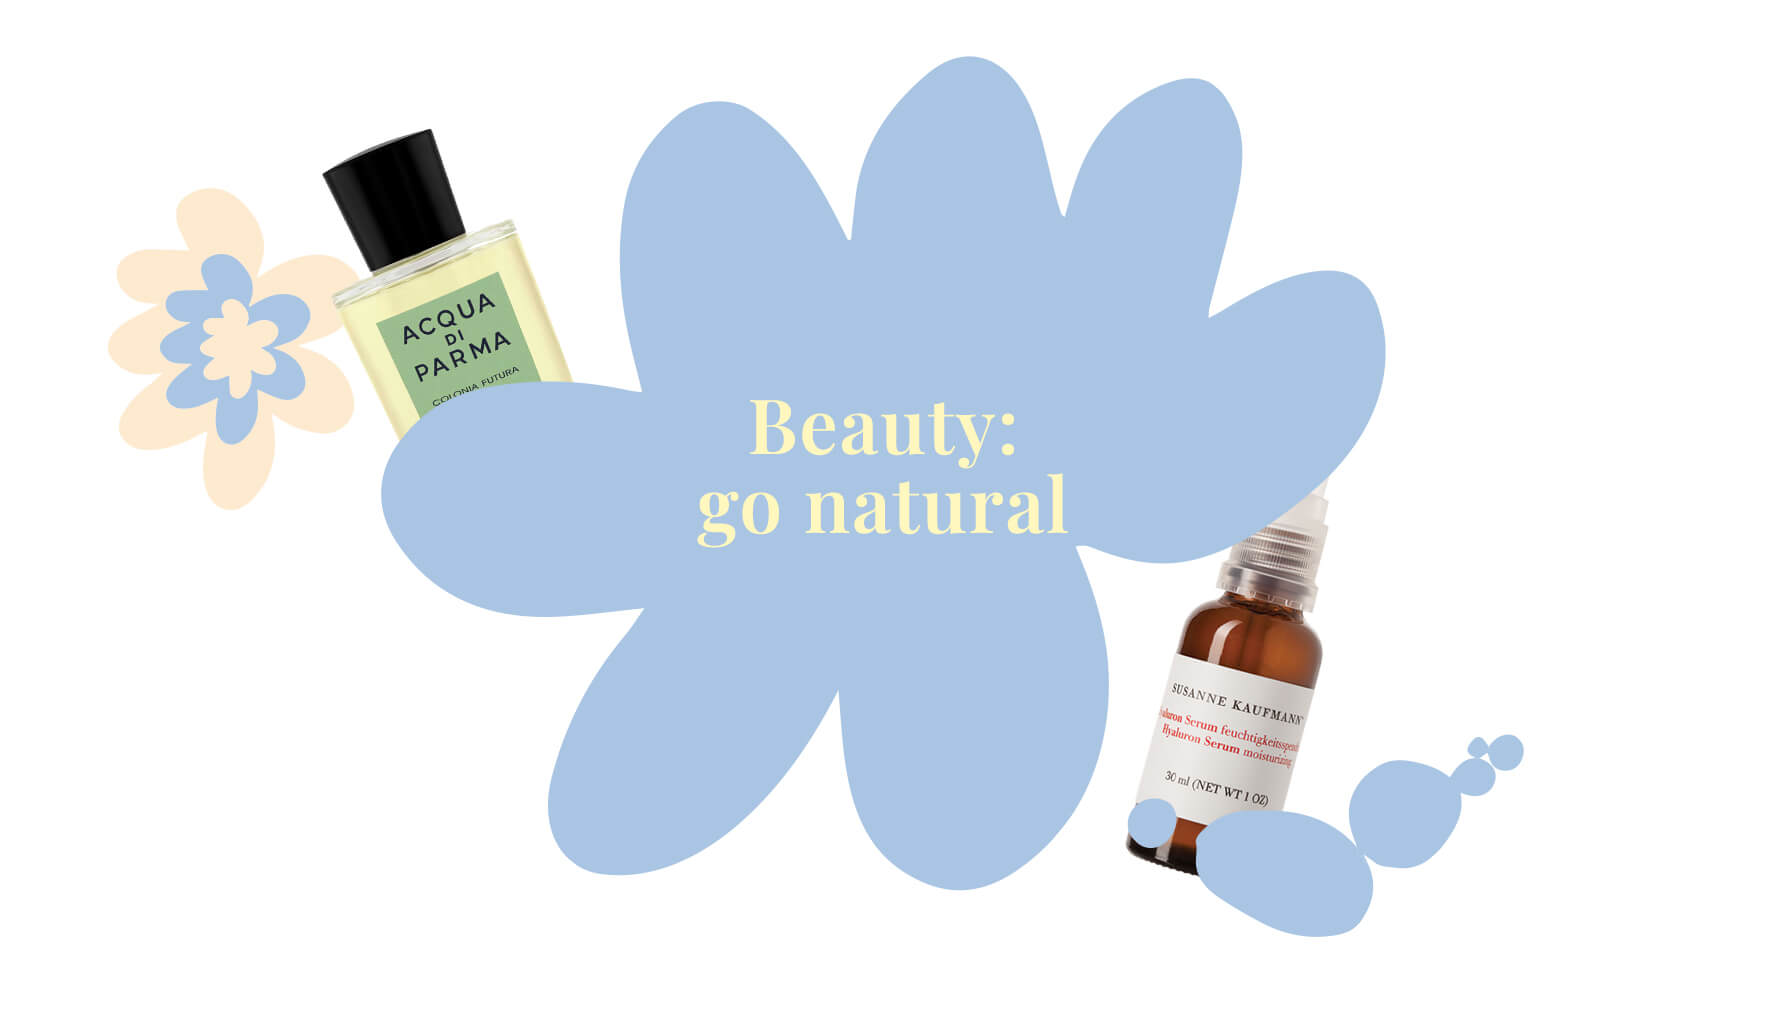 Beauty: go natural